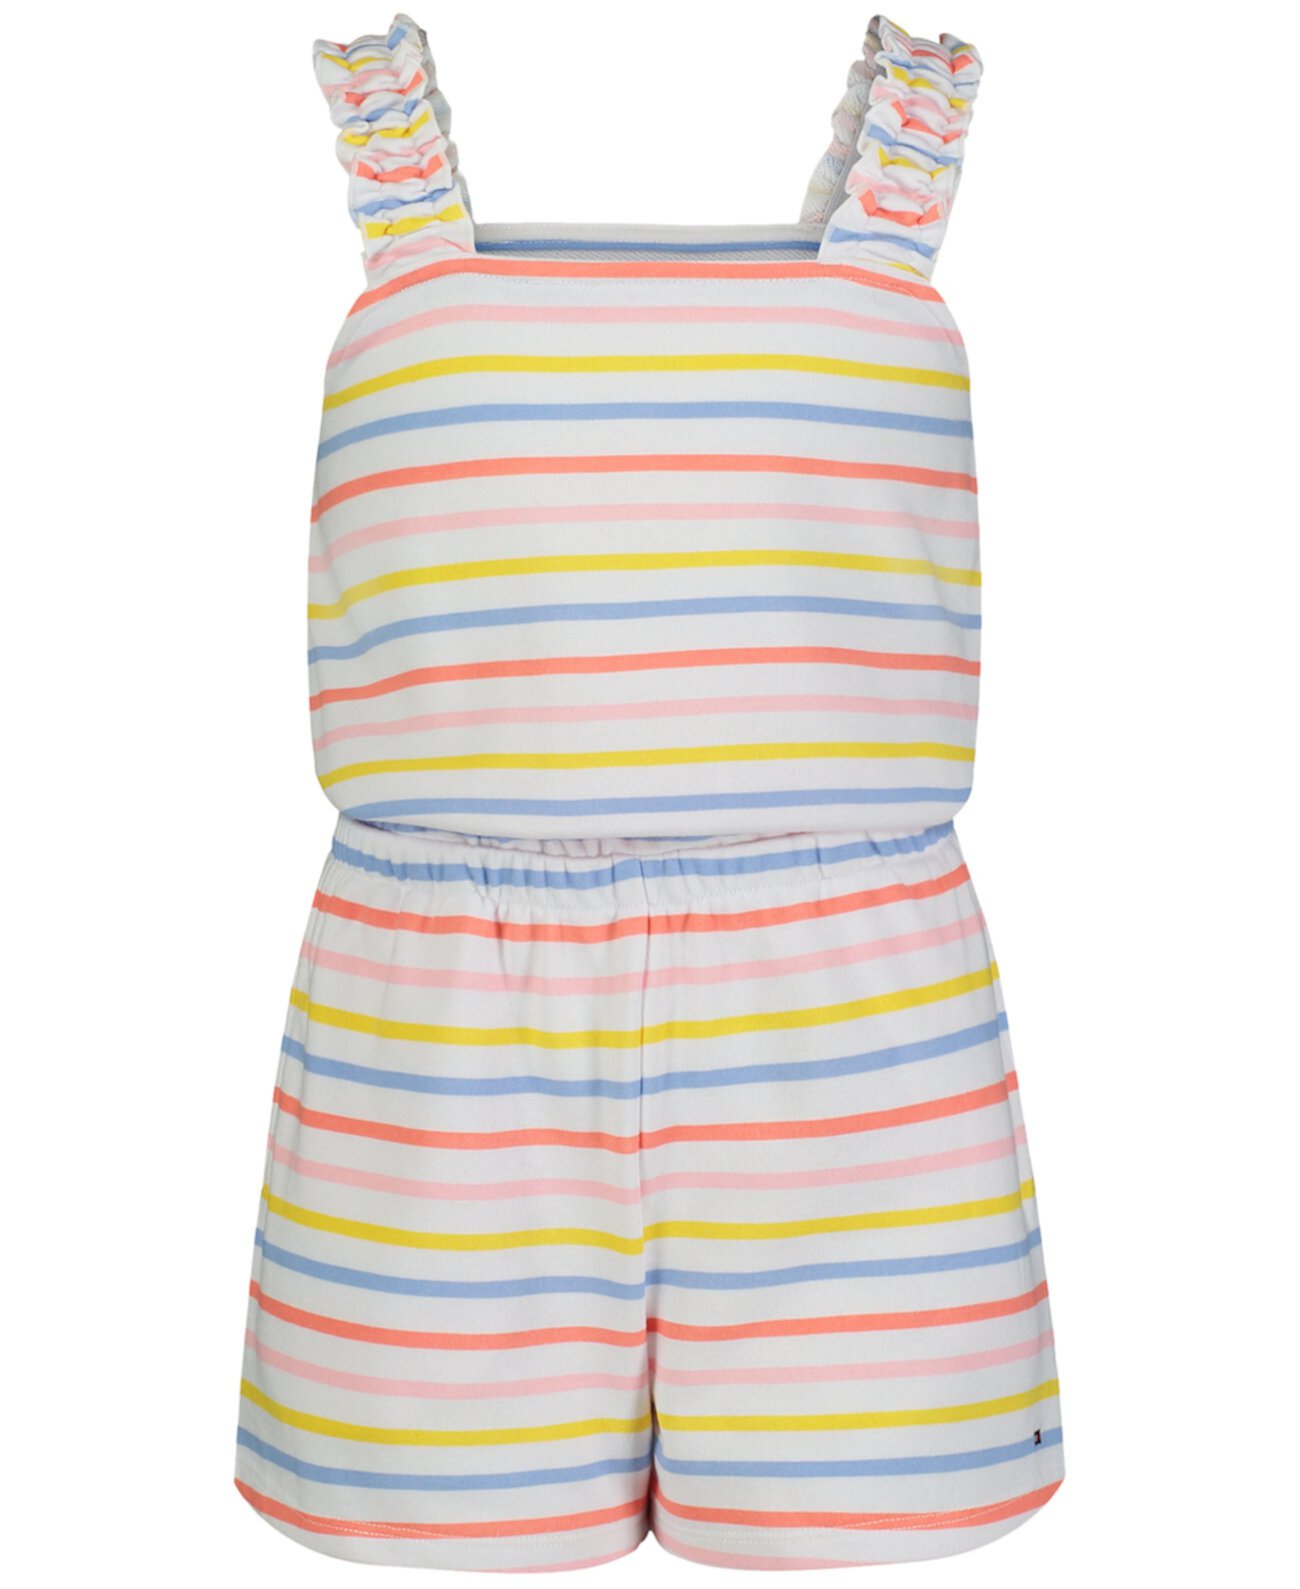 Toddler Girls Striped Terry Romper Tommy Hilfiger